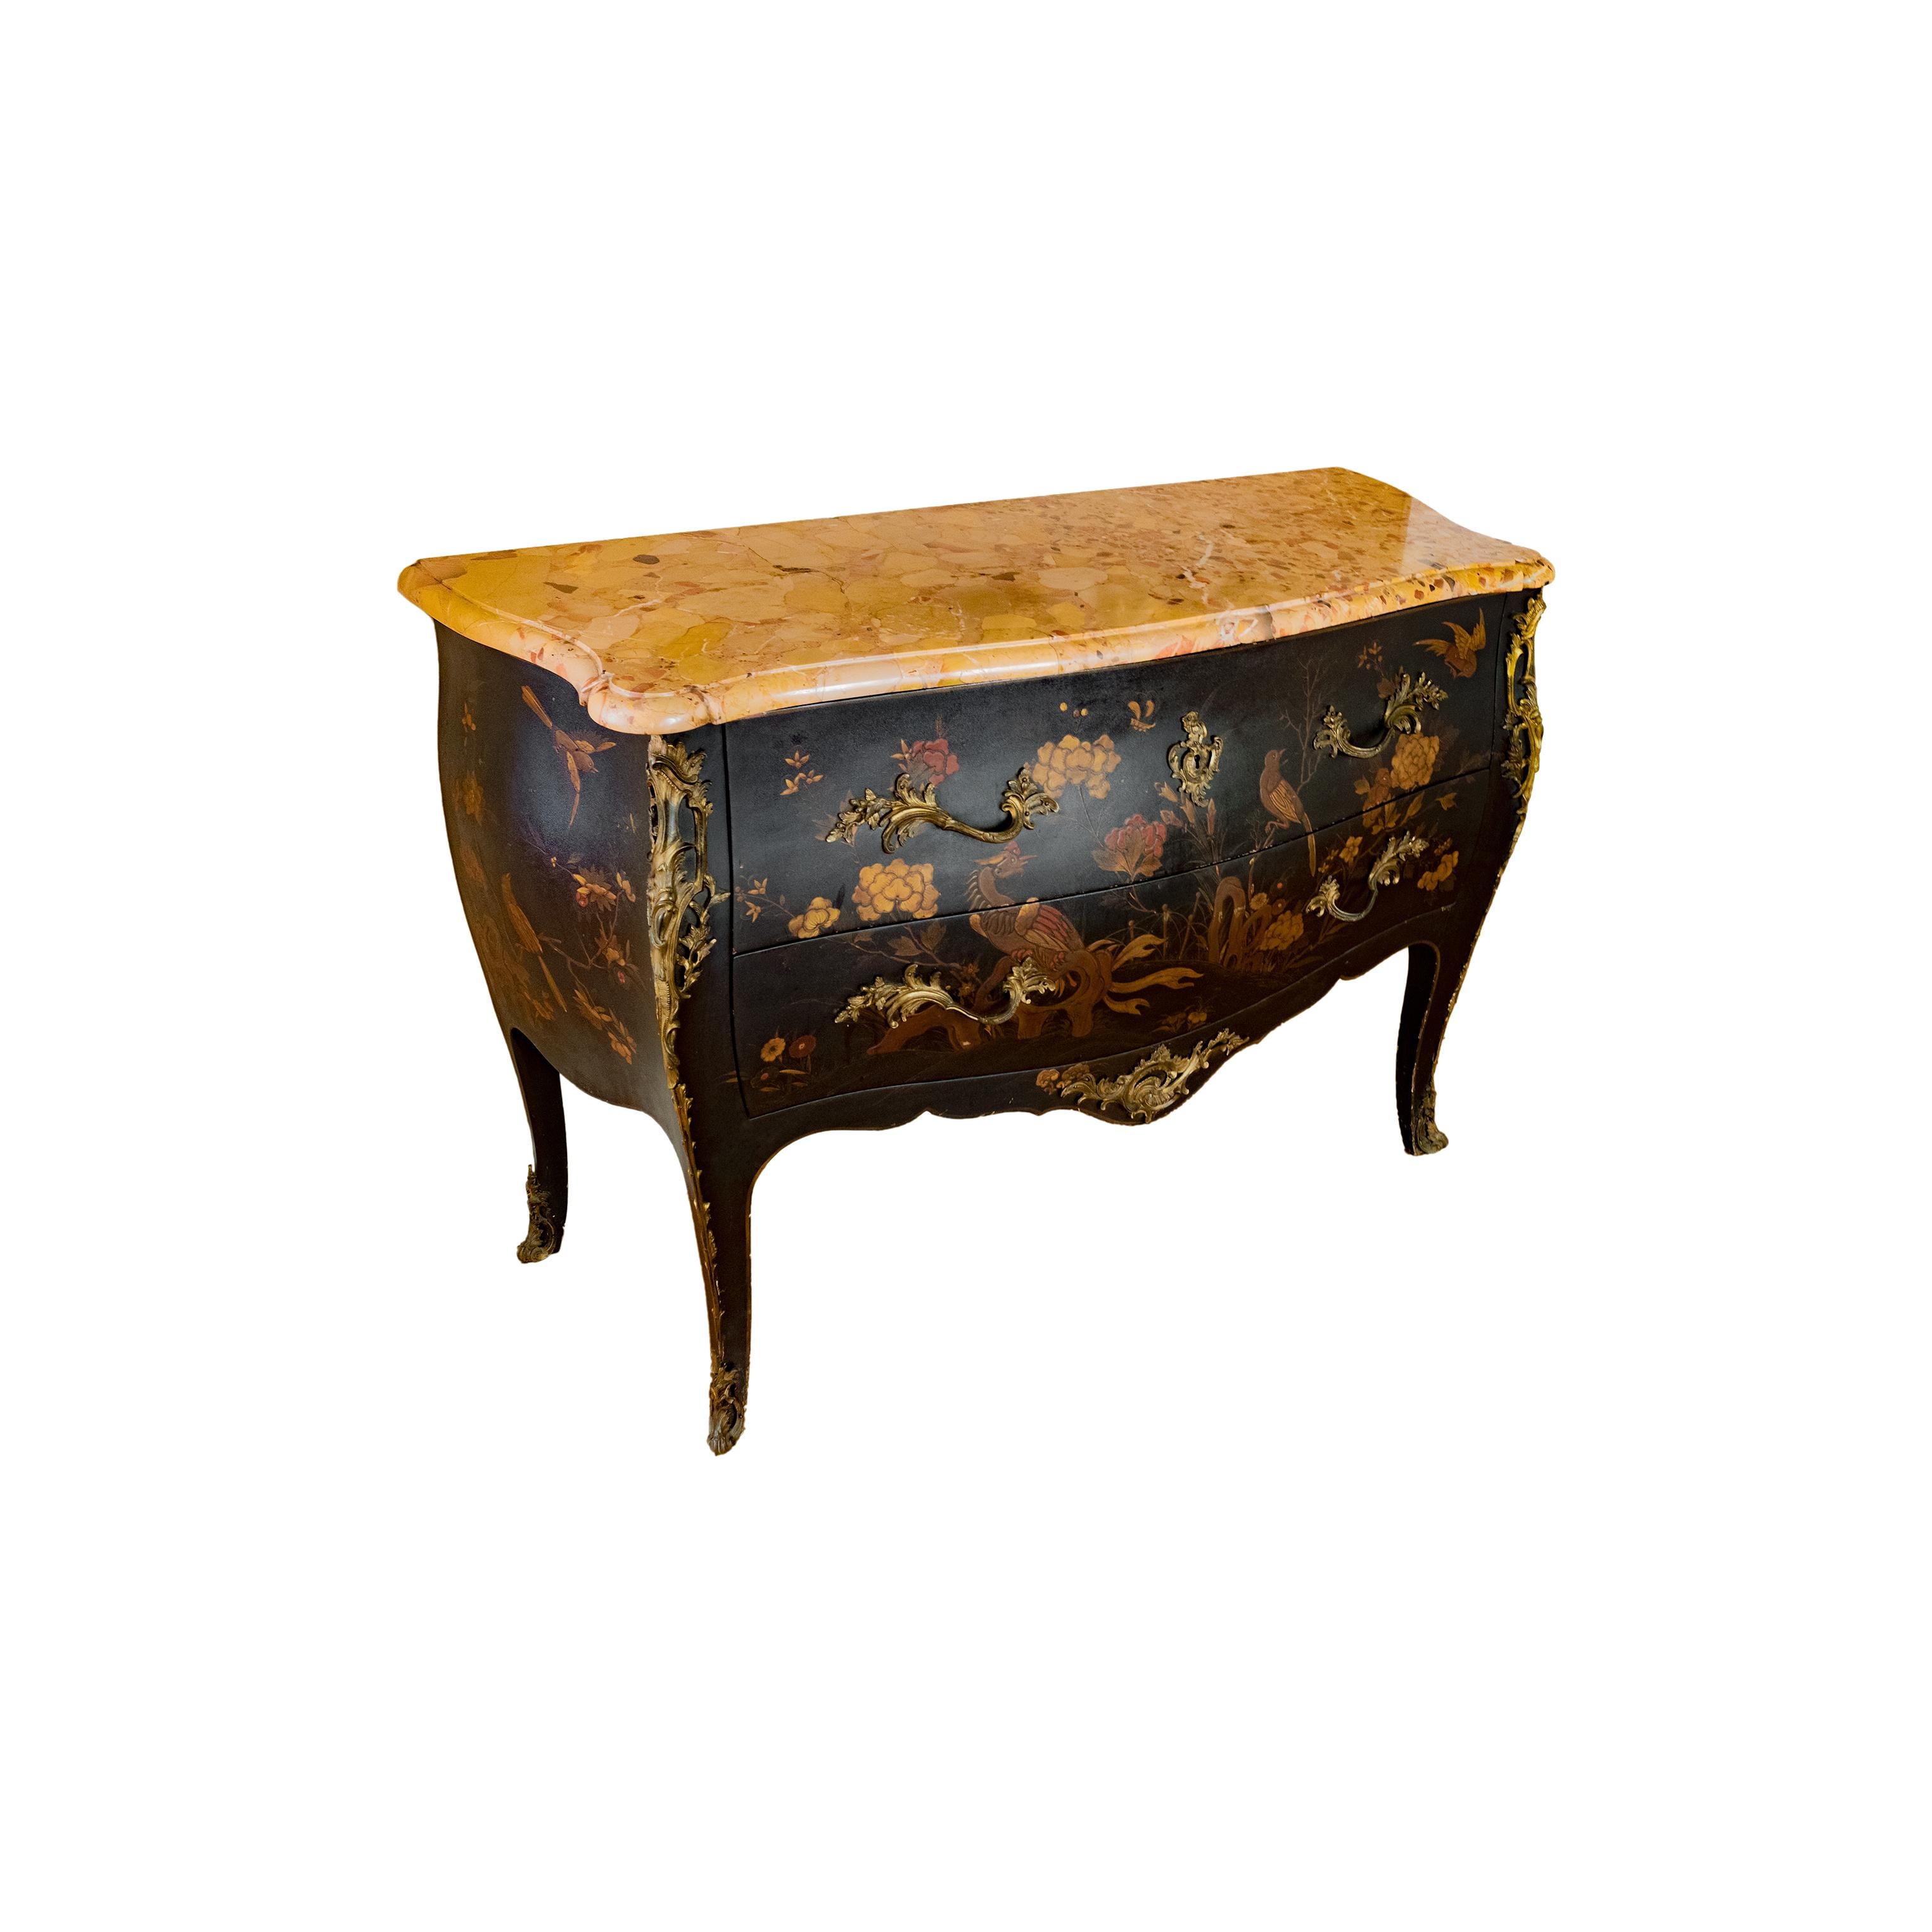 Chinese lacquer commode, chased and gilded bronze with Aleppo breccia marble top, with a frame of plain black Martin veneer.
Beautiful ornamentation of finely chiseled and gilded bronzes including angle drops, foot
slippers, lamp base and keyholes.